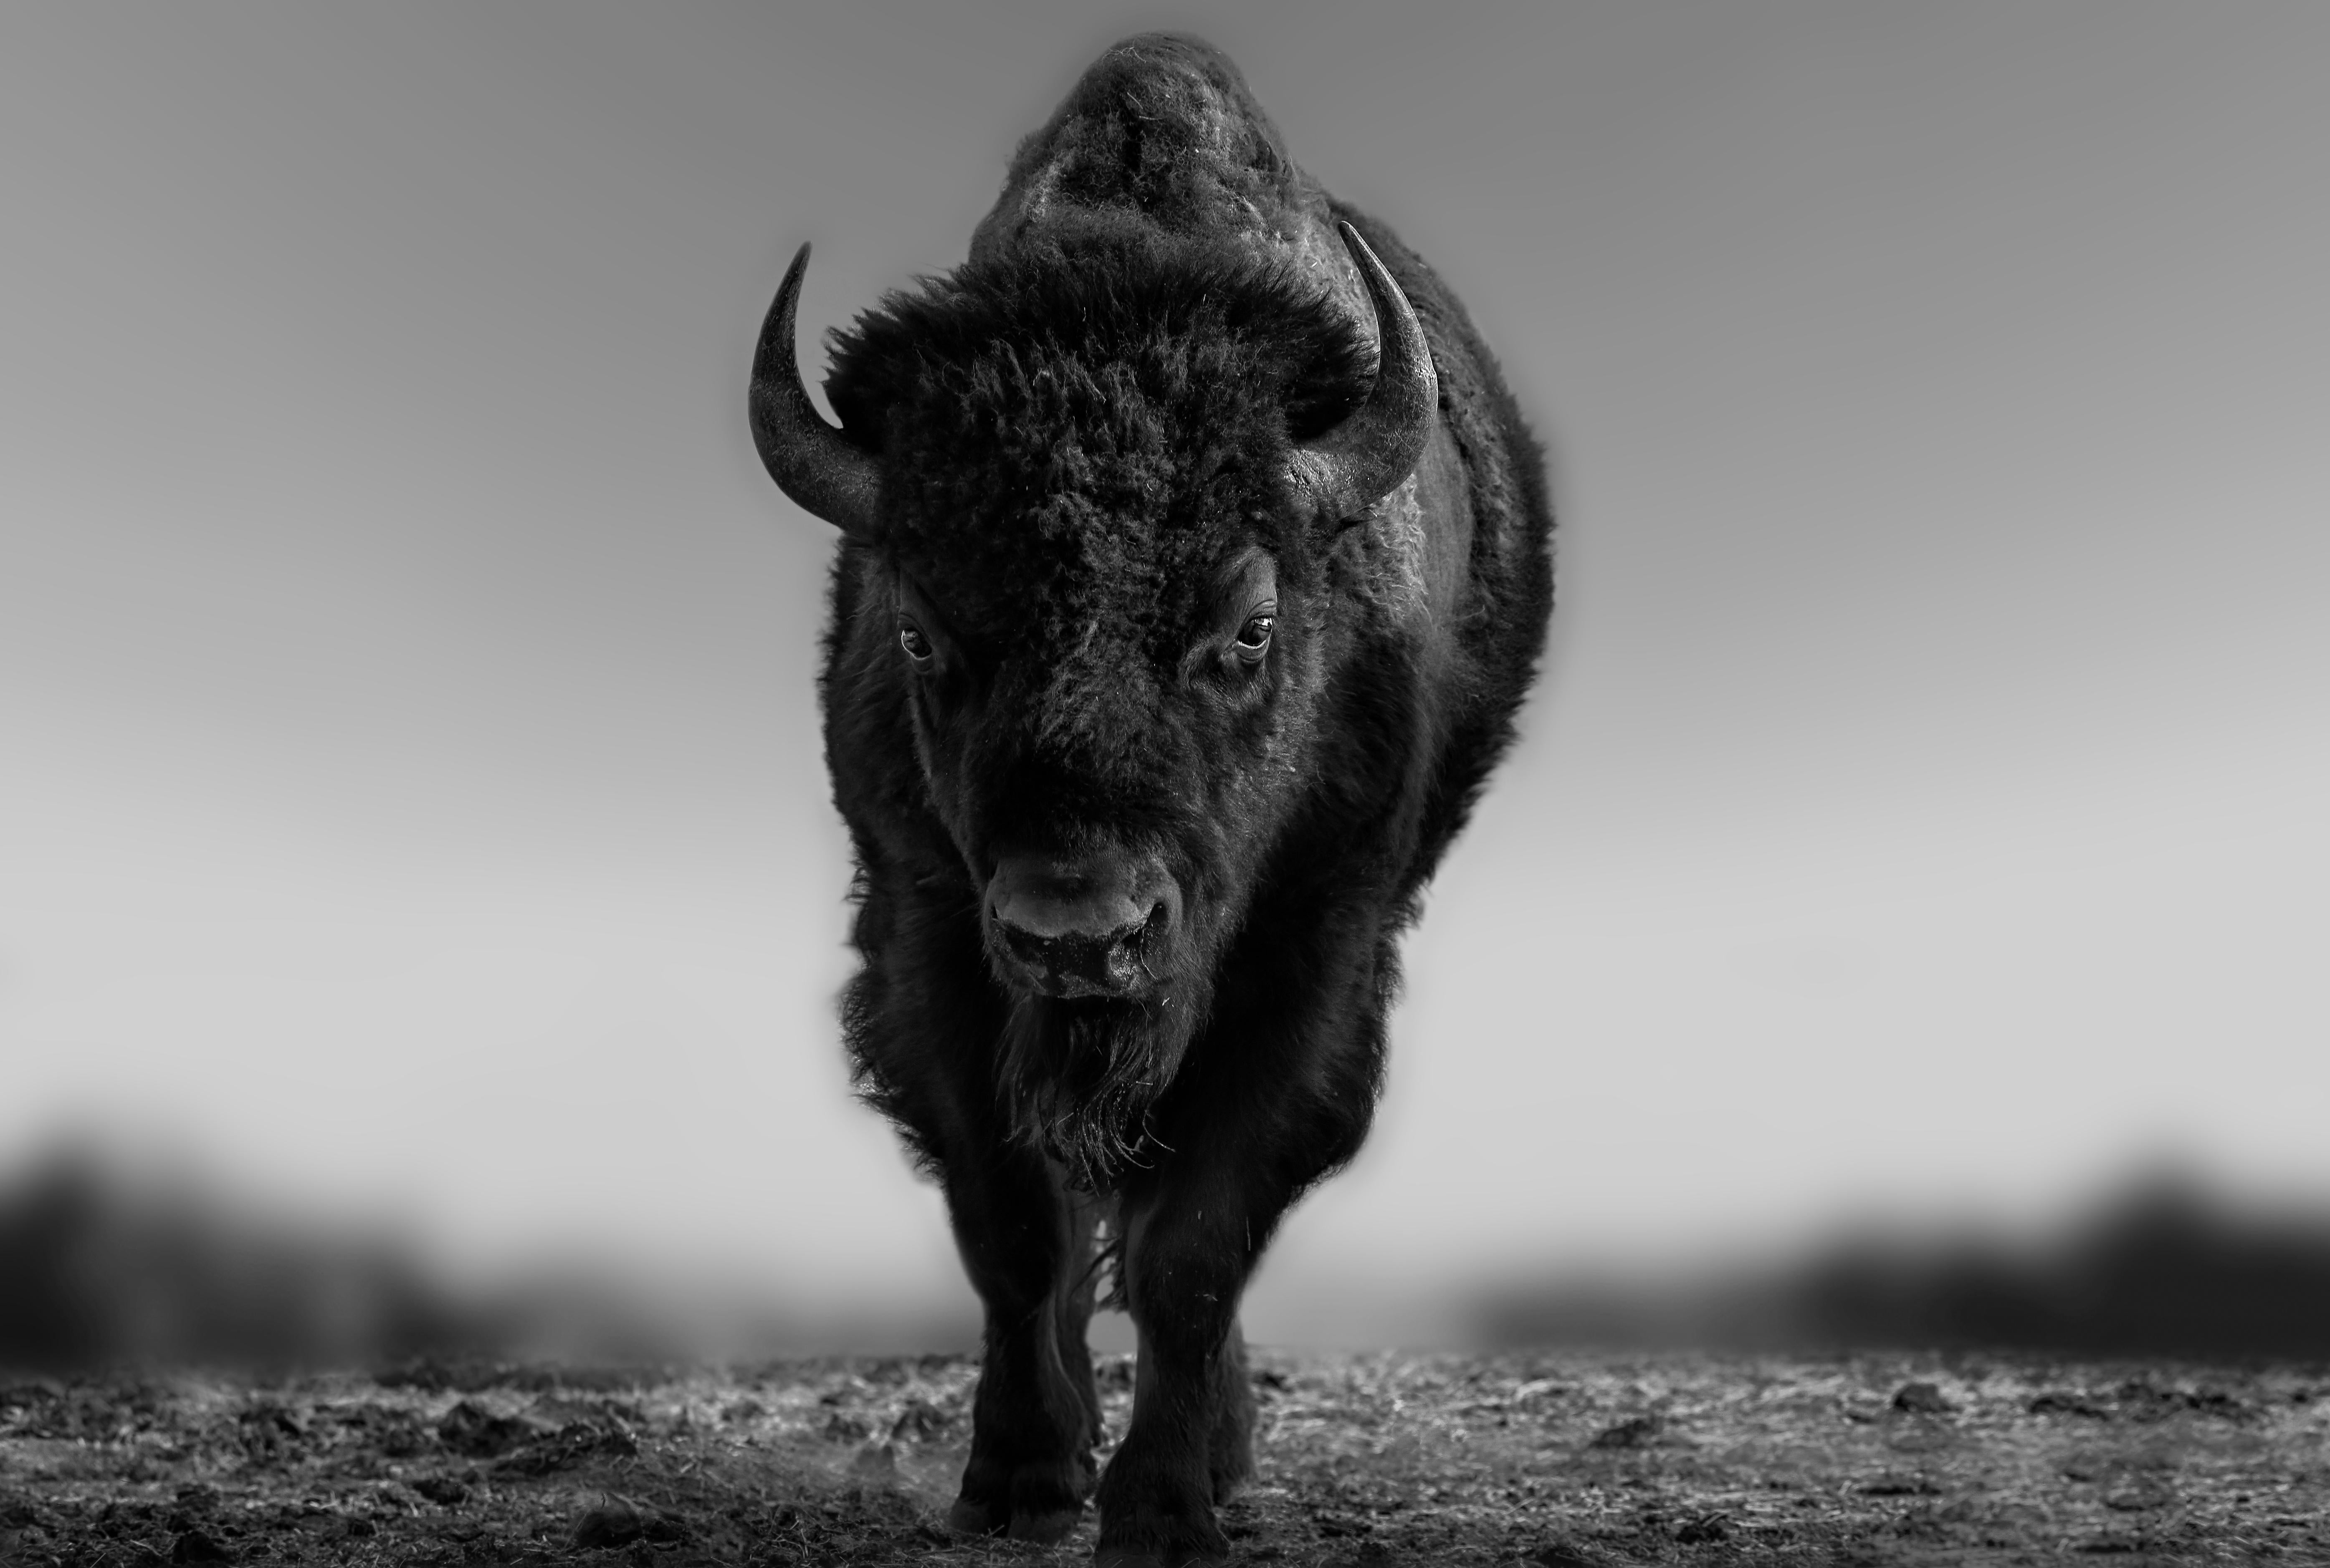 Shane Russeck Black and White Photograph - "The Beast" 36x48 Black & White Photograph of Bison Buffalo Unsigned Photography